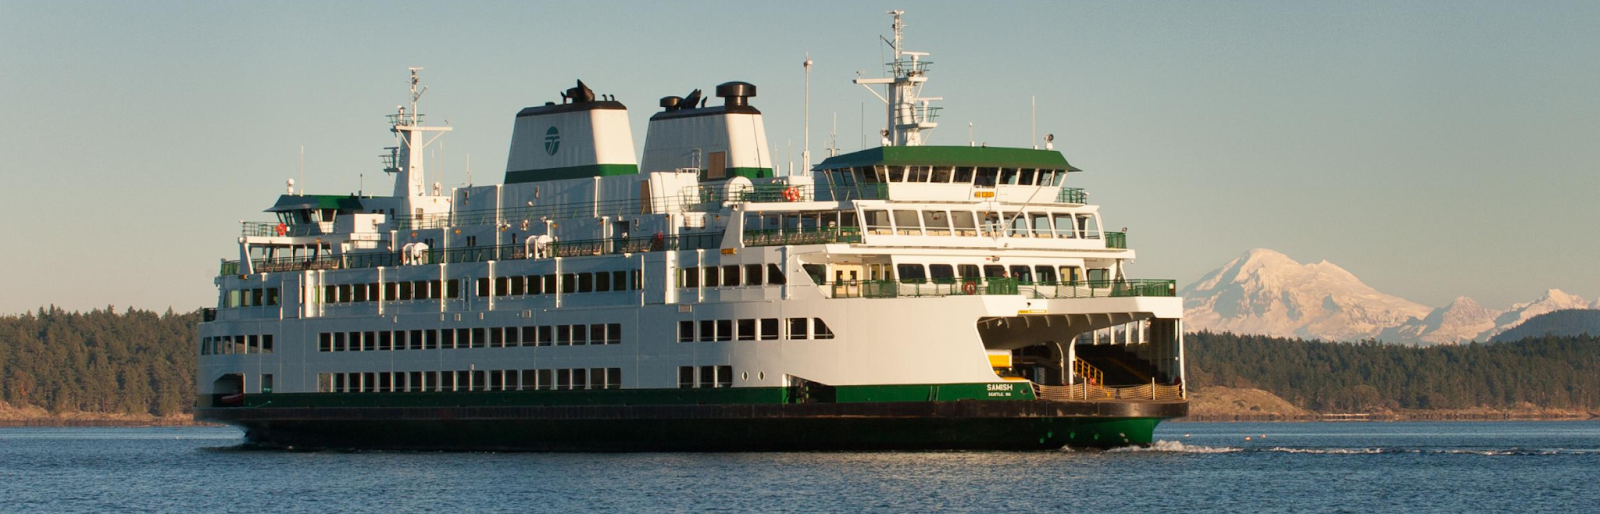 Digital transit displays with live updates on Seattle's ferries